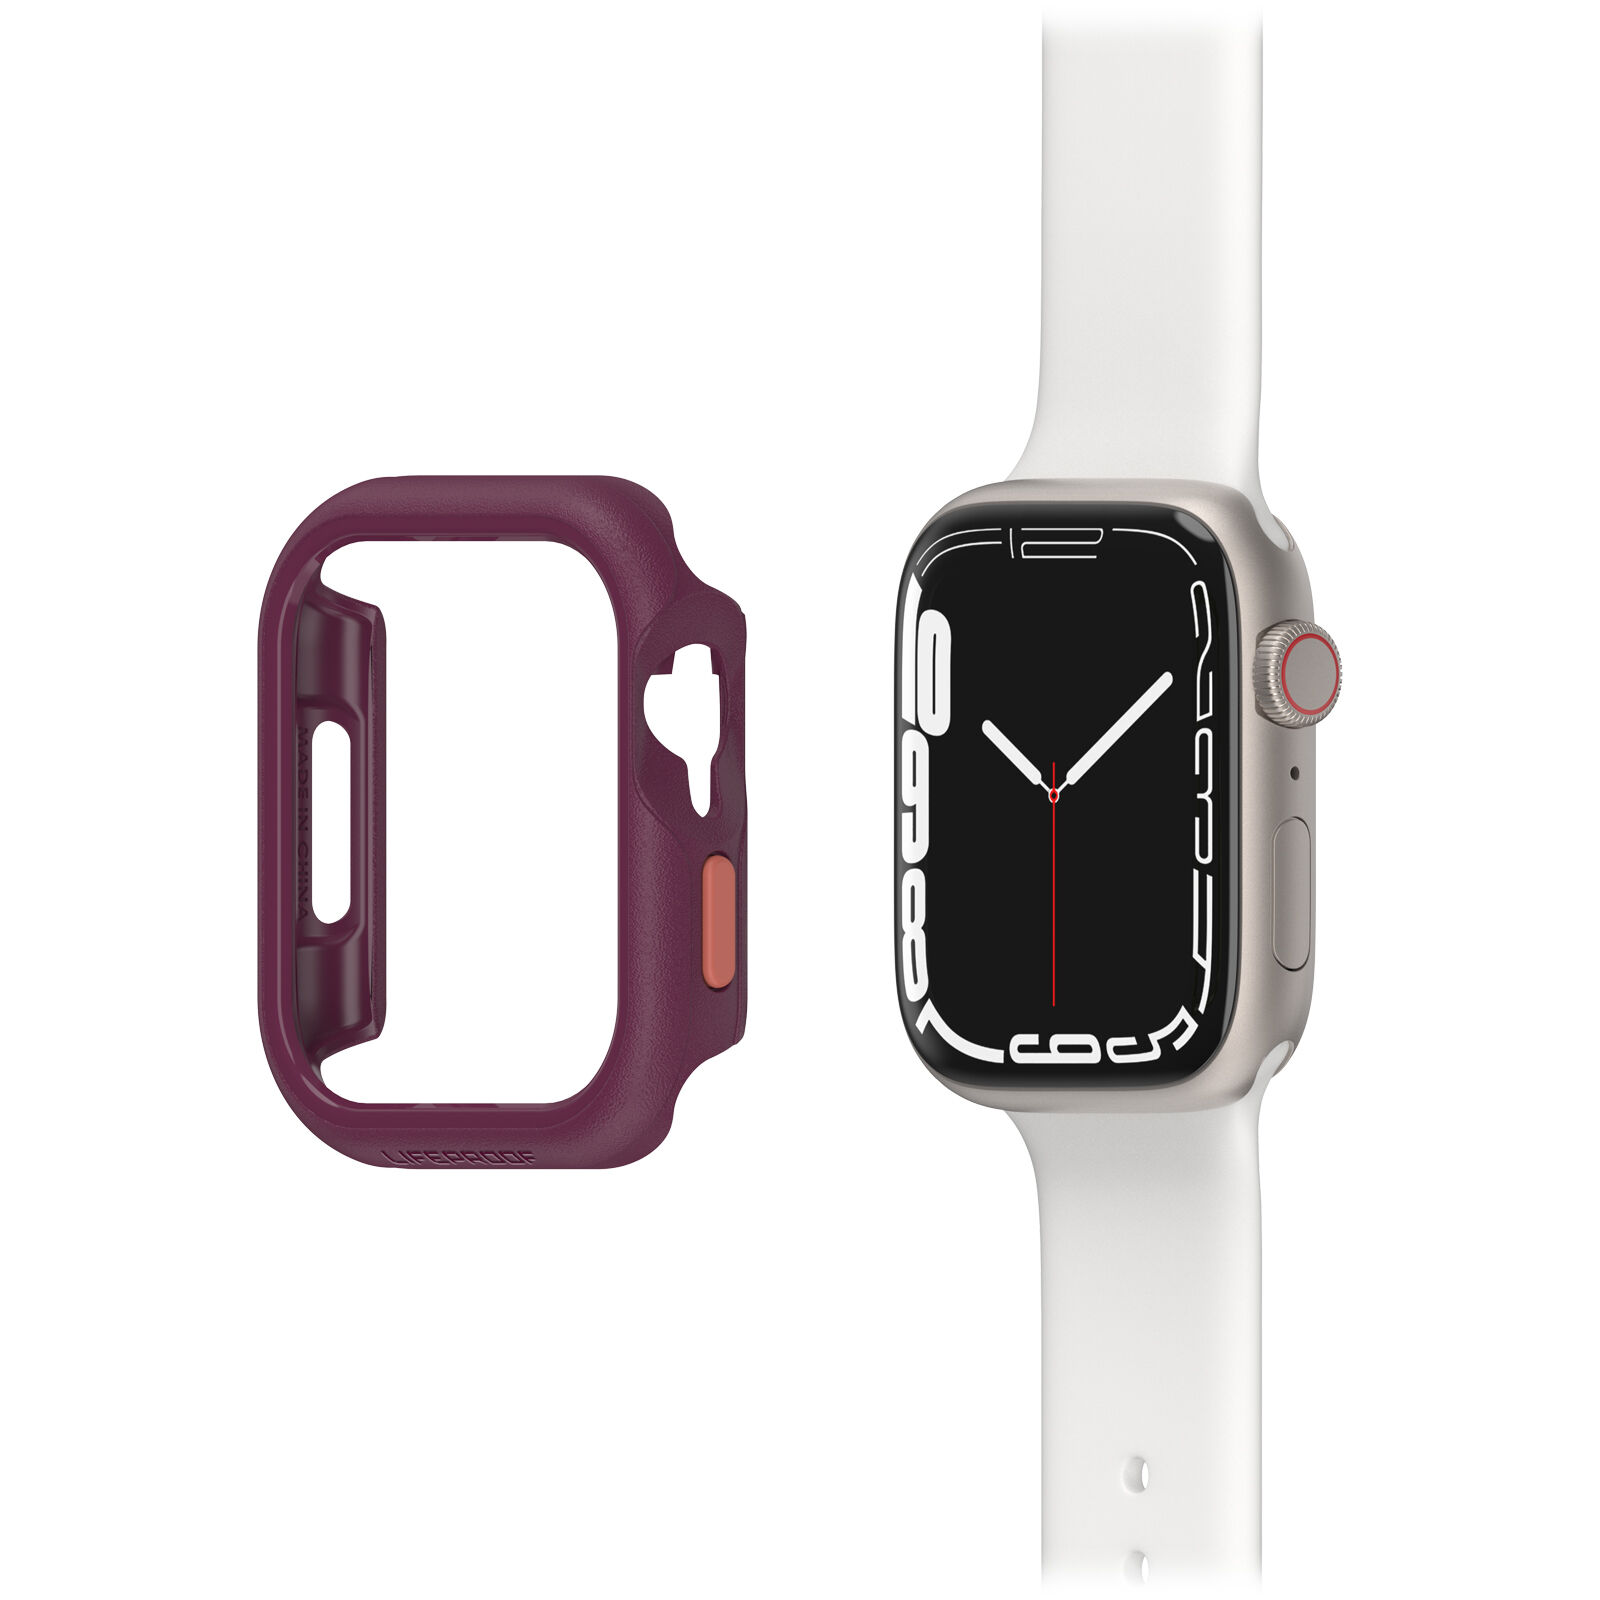 Apple Watch Series 8/7 protective case — style that's sustainable.